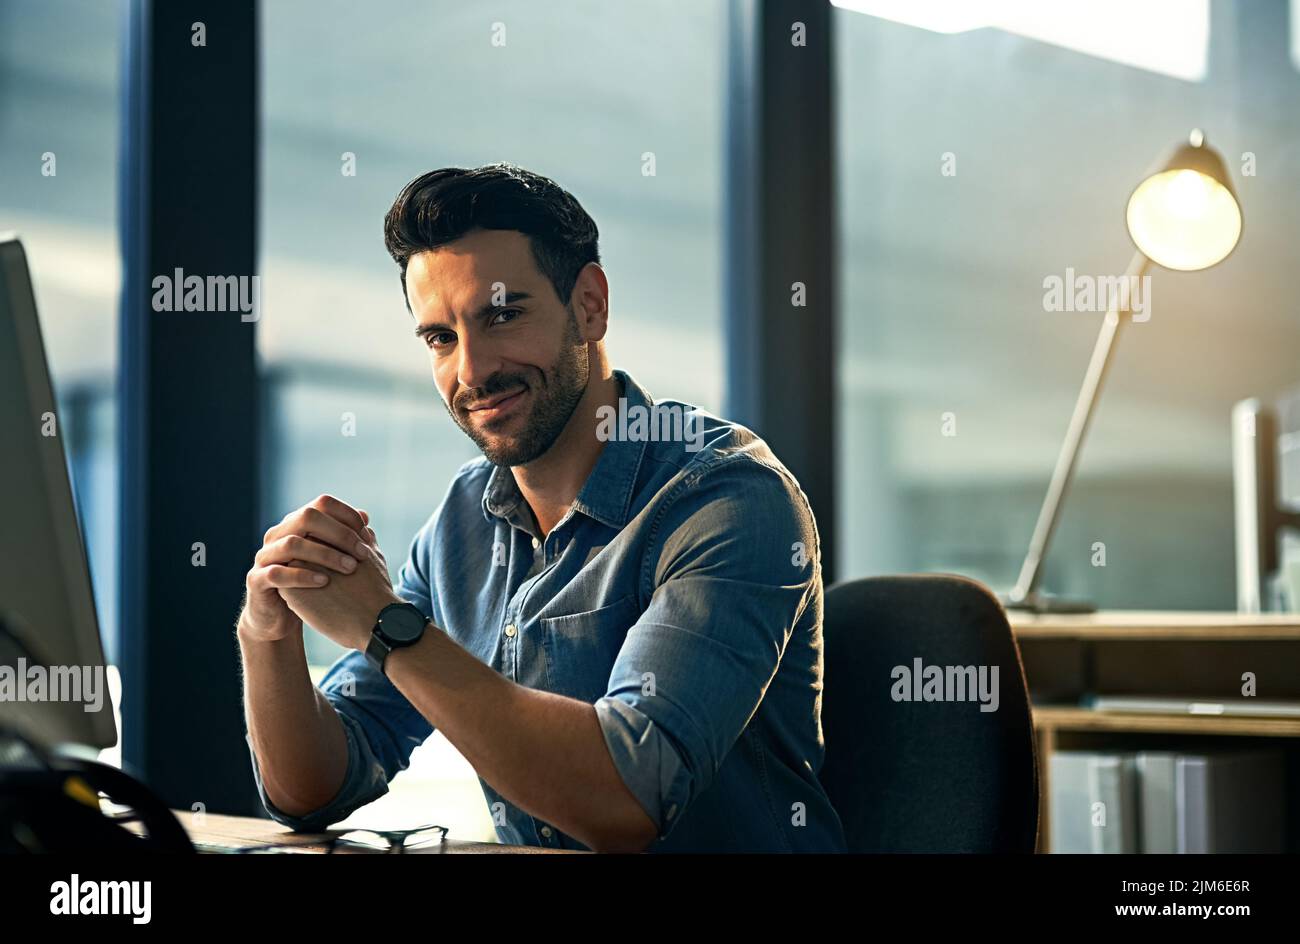 Portrait of a young businessman on a computer during a late night at work. Confident hardworking man at a corporate office desk working overtime Stock Photo